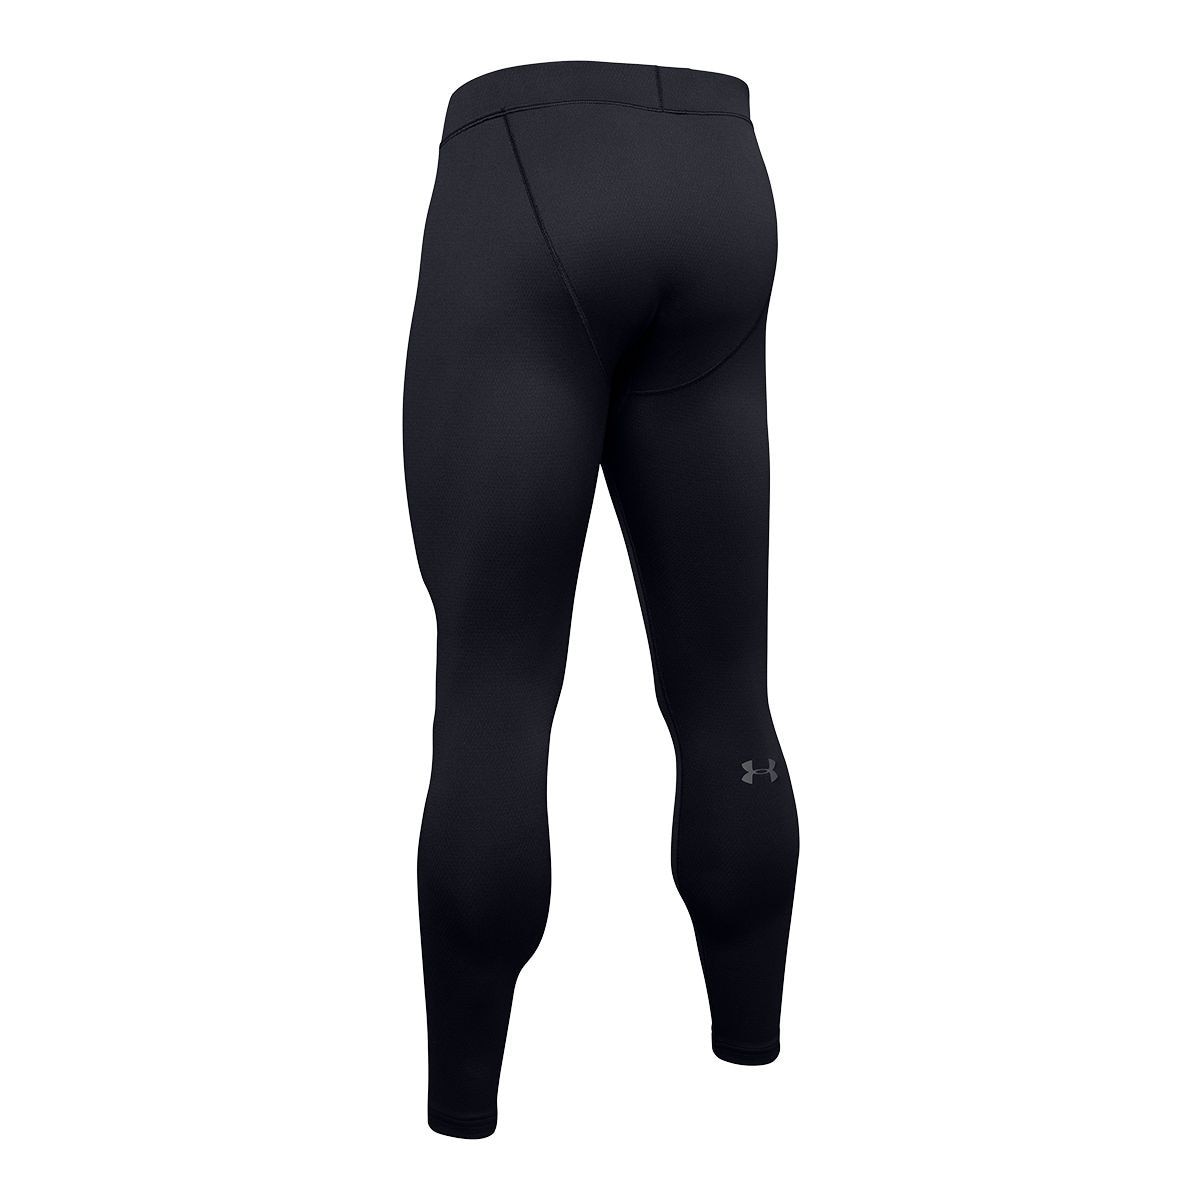 MEN'S MIDWEIGHT COMPRESSION TIGHT 23